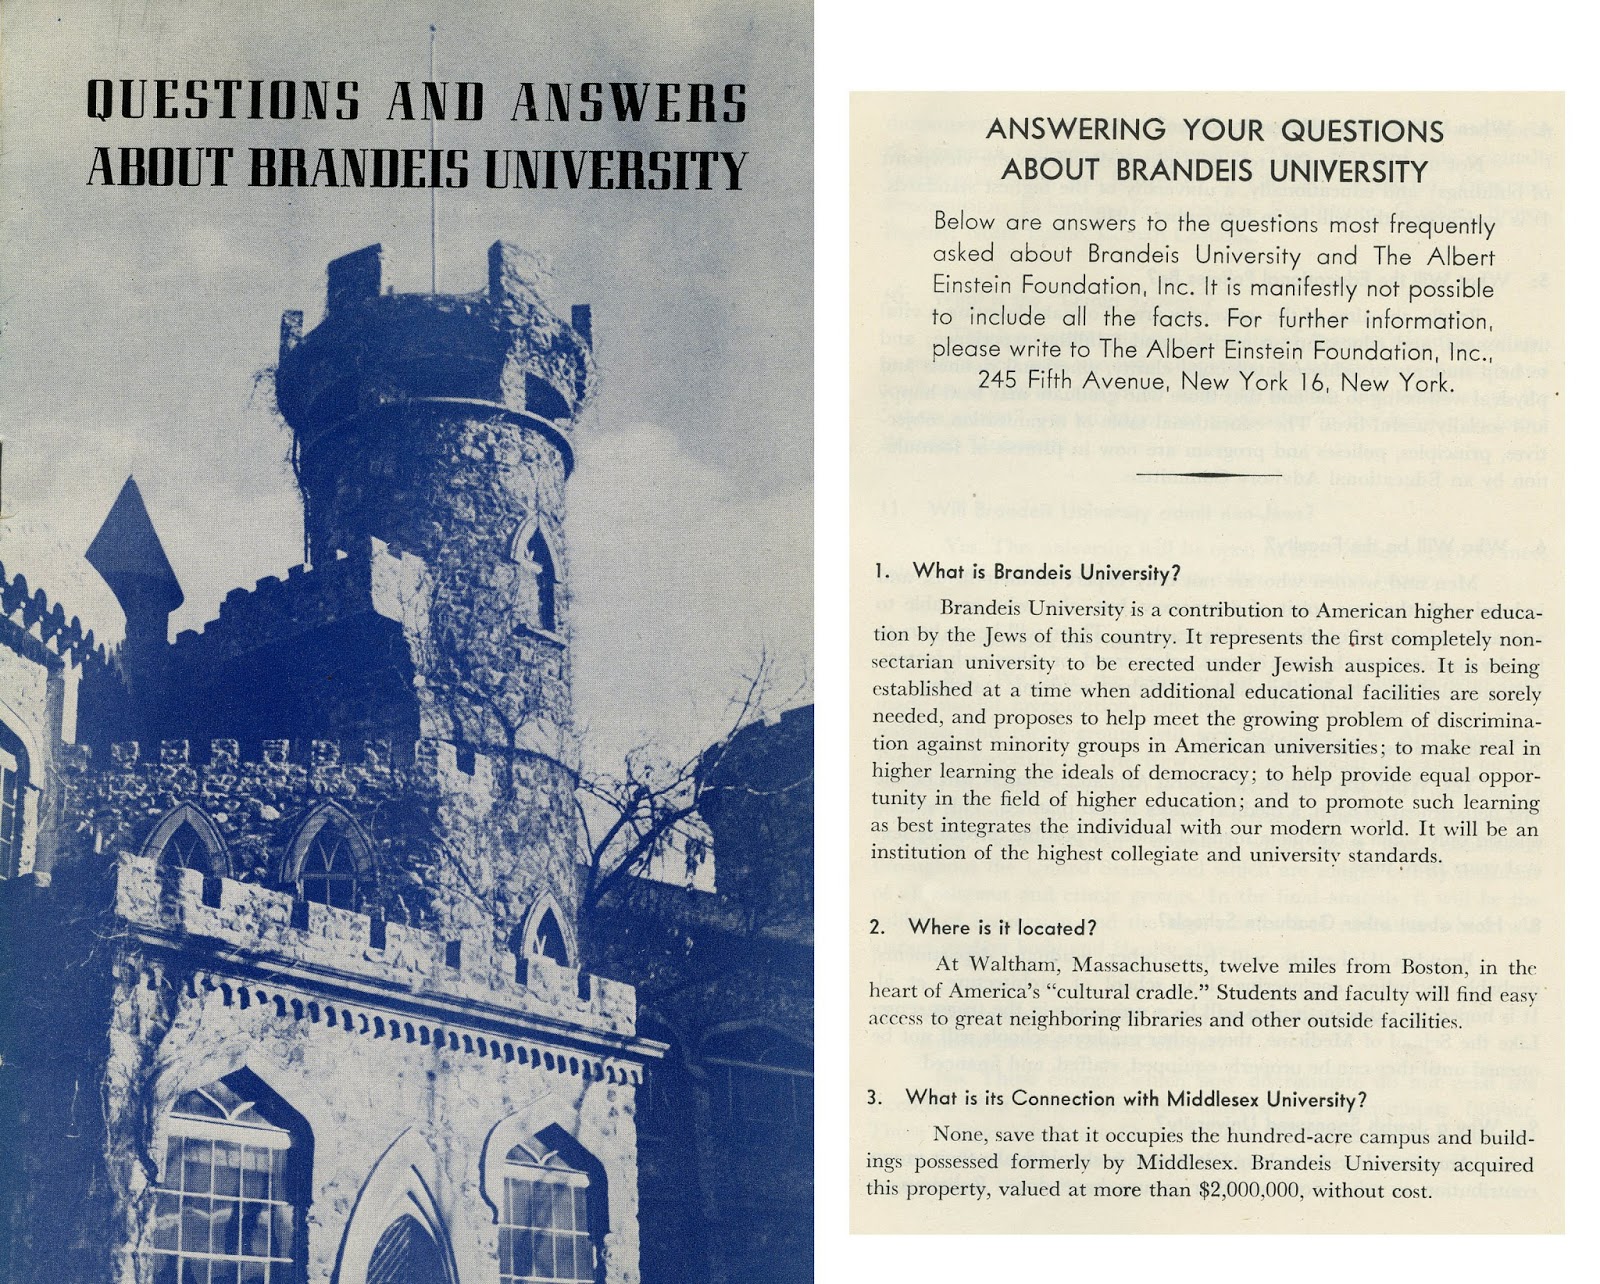 Questions and Answers About Brandeis Brochure c.a. 1948, with photo of Usen Castle on the cover